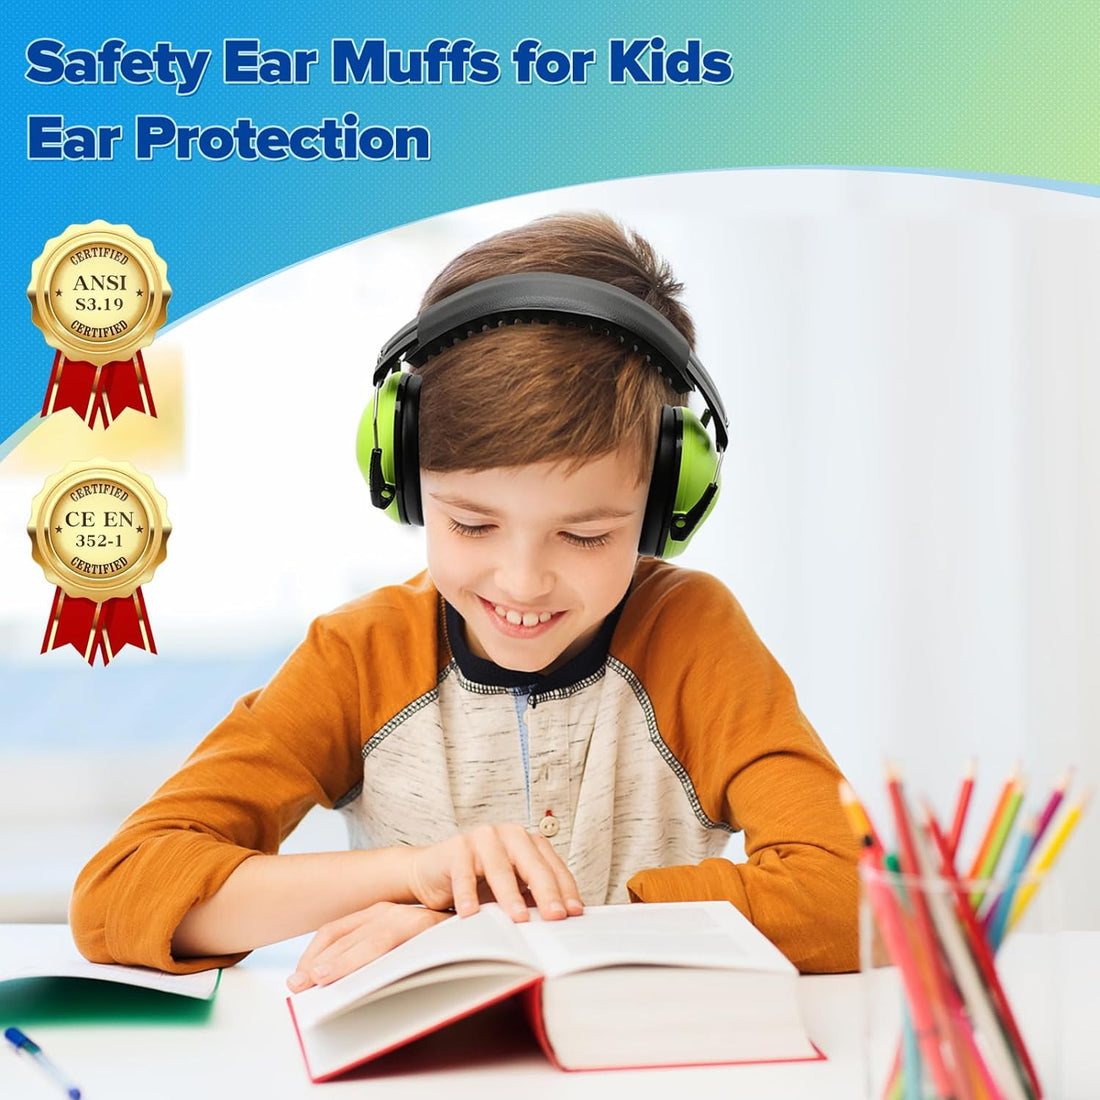 3Pack Noise Canceling Headphones for Kids, Kids Ear Protection Earmuffs for Autism, Toddler, Children, Noise Cancelling Sound Proof Earmuffs/Headphones for Concerts, Air Shows, Fireworks